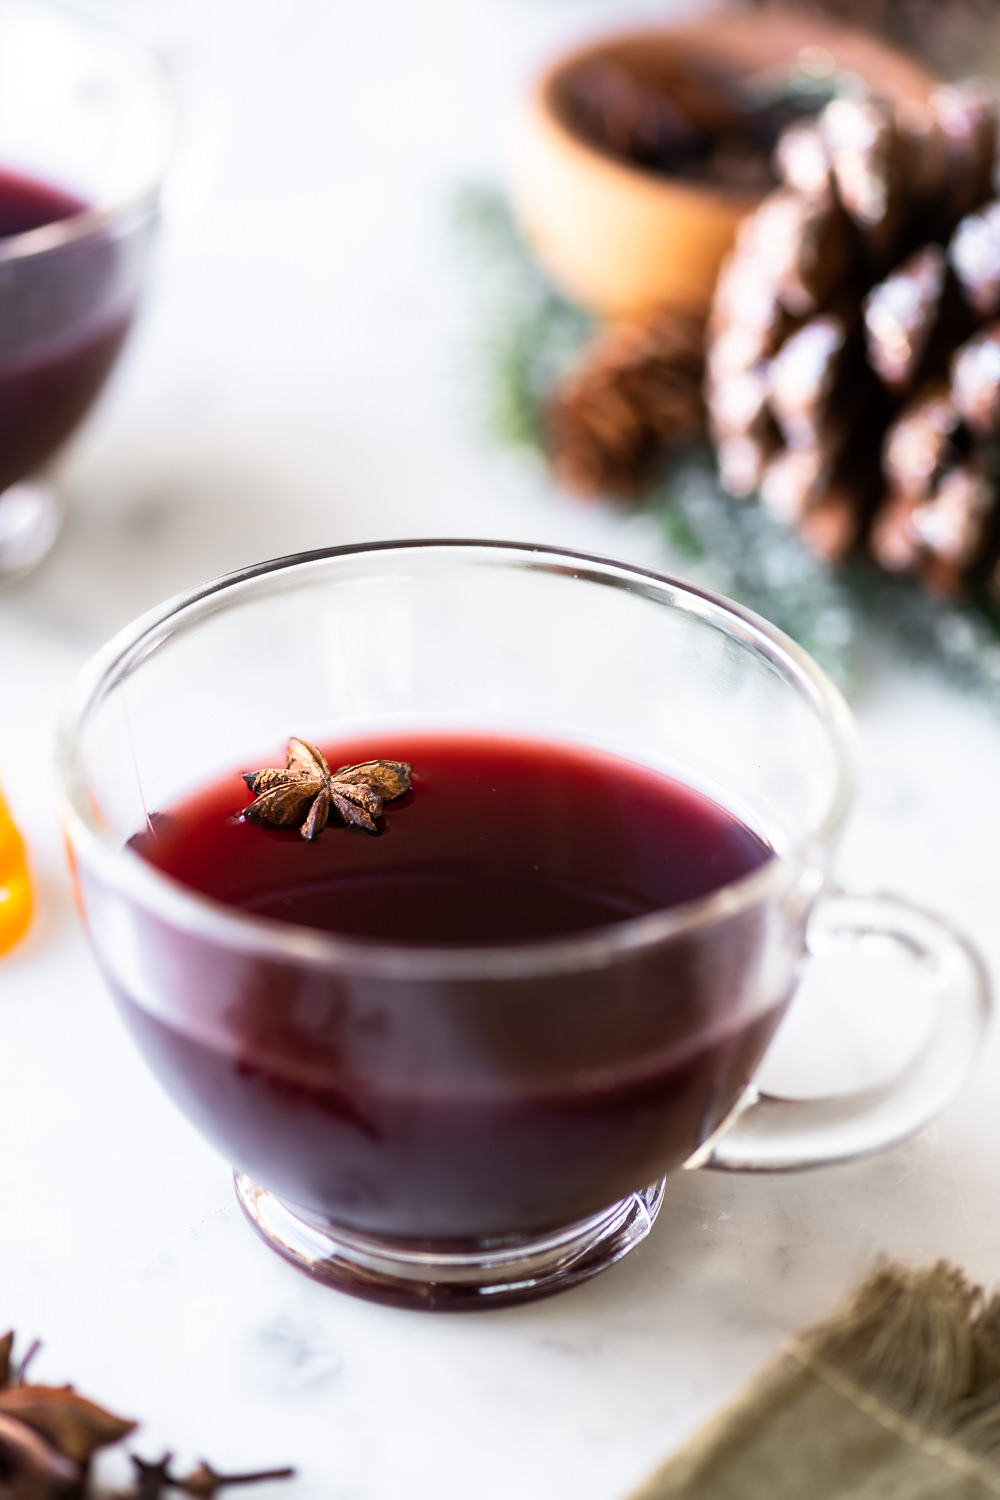 https://www.withspice.com/wp-content/uploads/2021/10/how-to-make-vin-chaud-french-mulled-wine.jpg